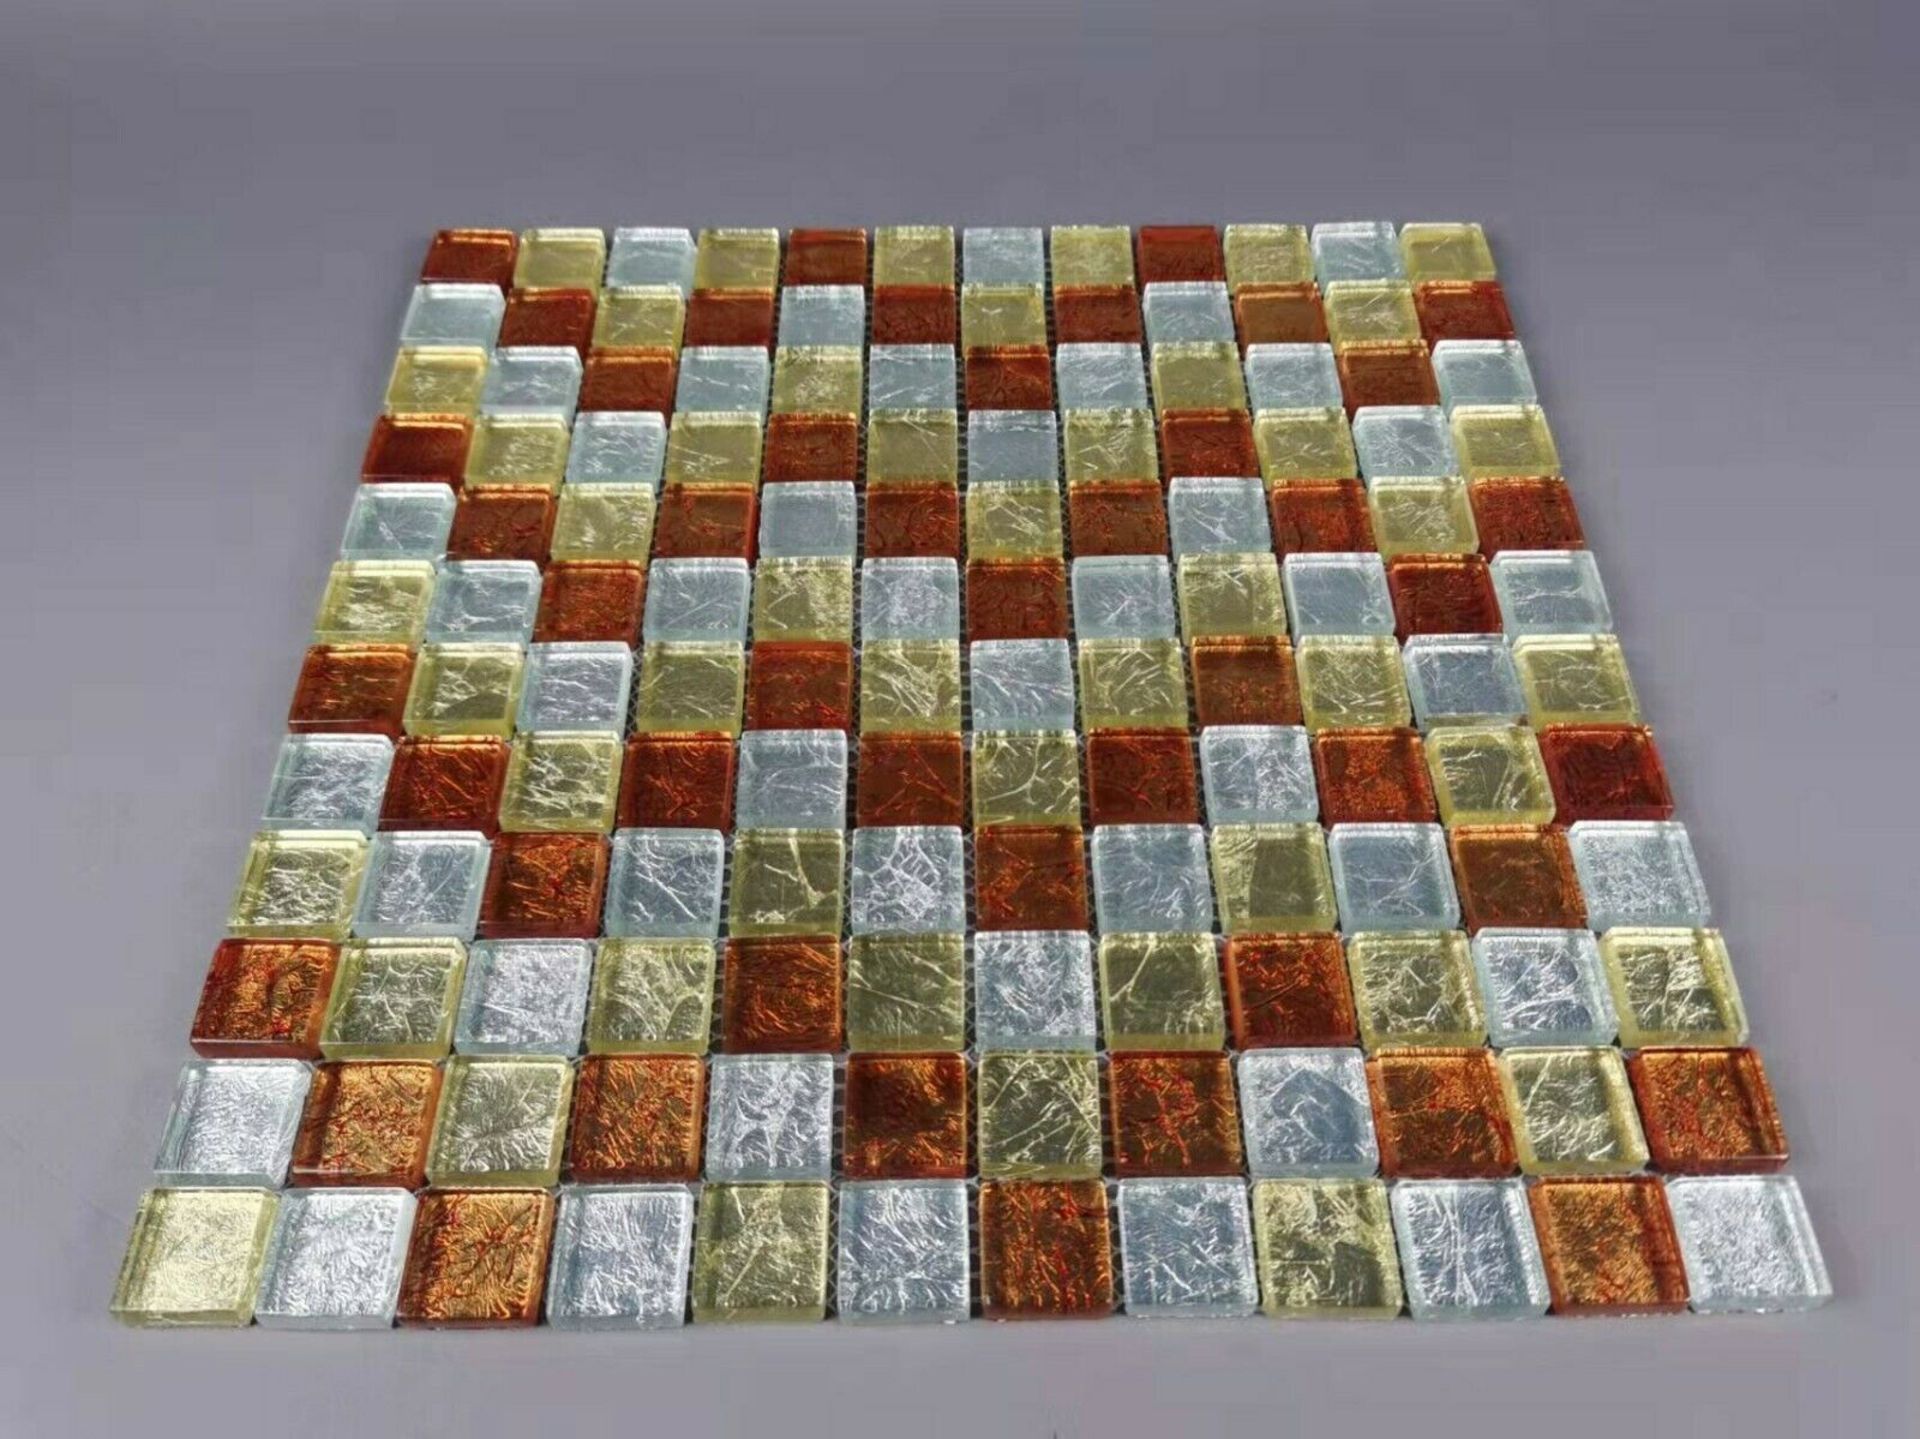 5 Square Metres - High Quality Glass/Stainless Steel Mosaic Tiles - Image 3 of 4